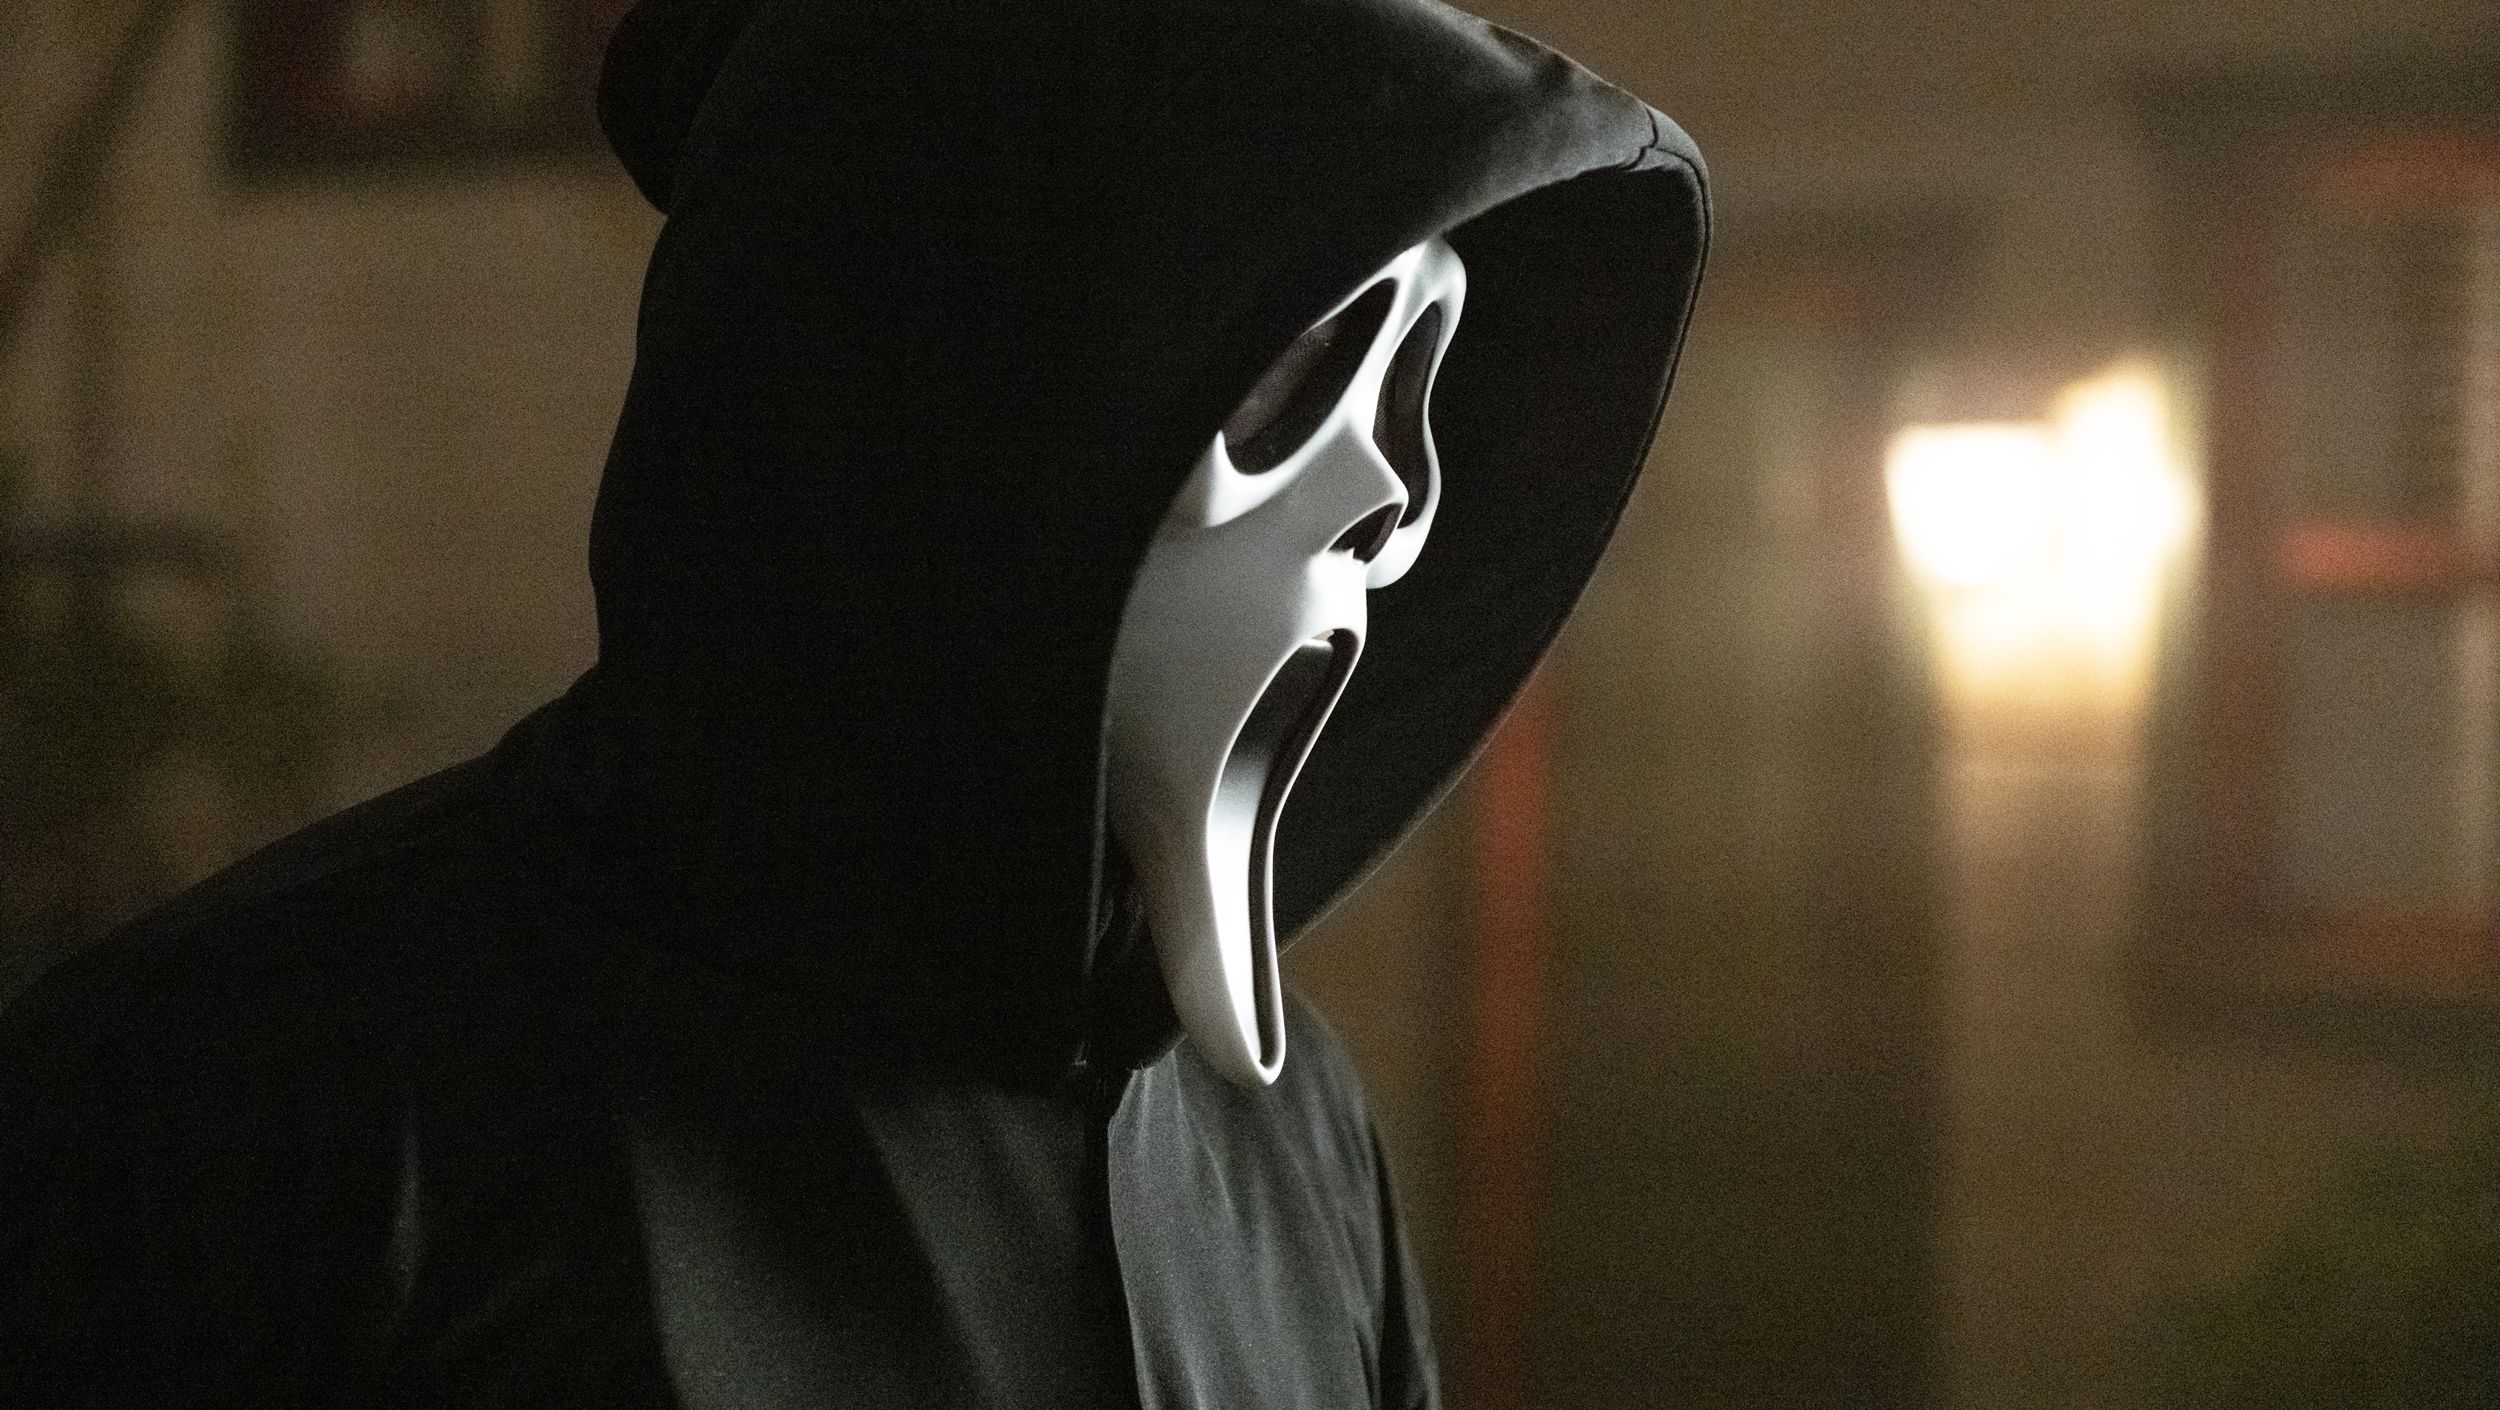 Scream ending explained - who is Ghostface?